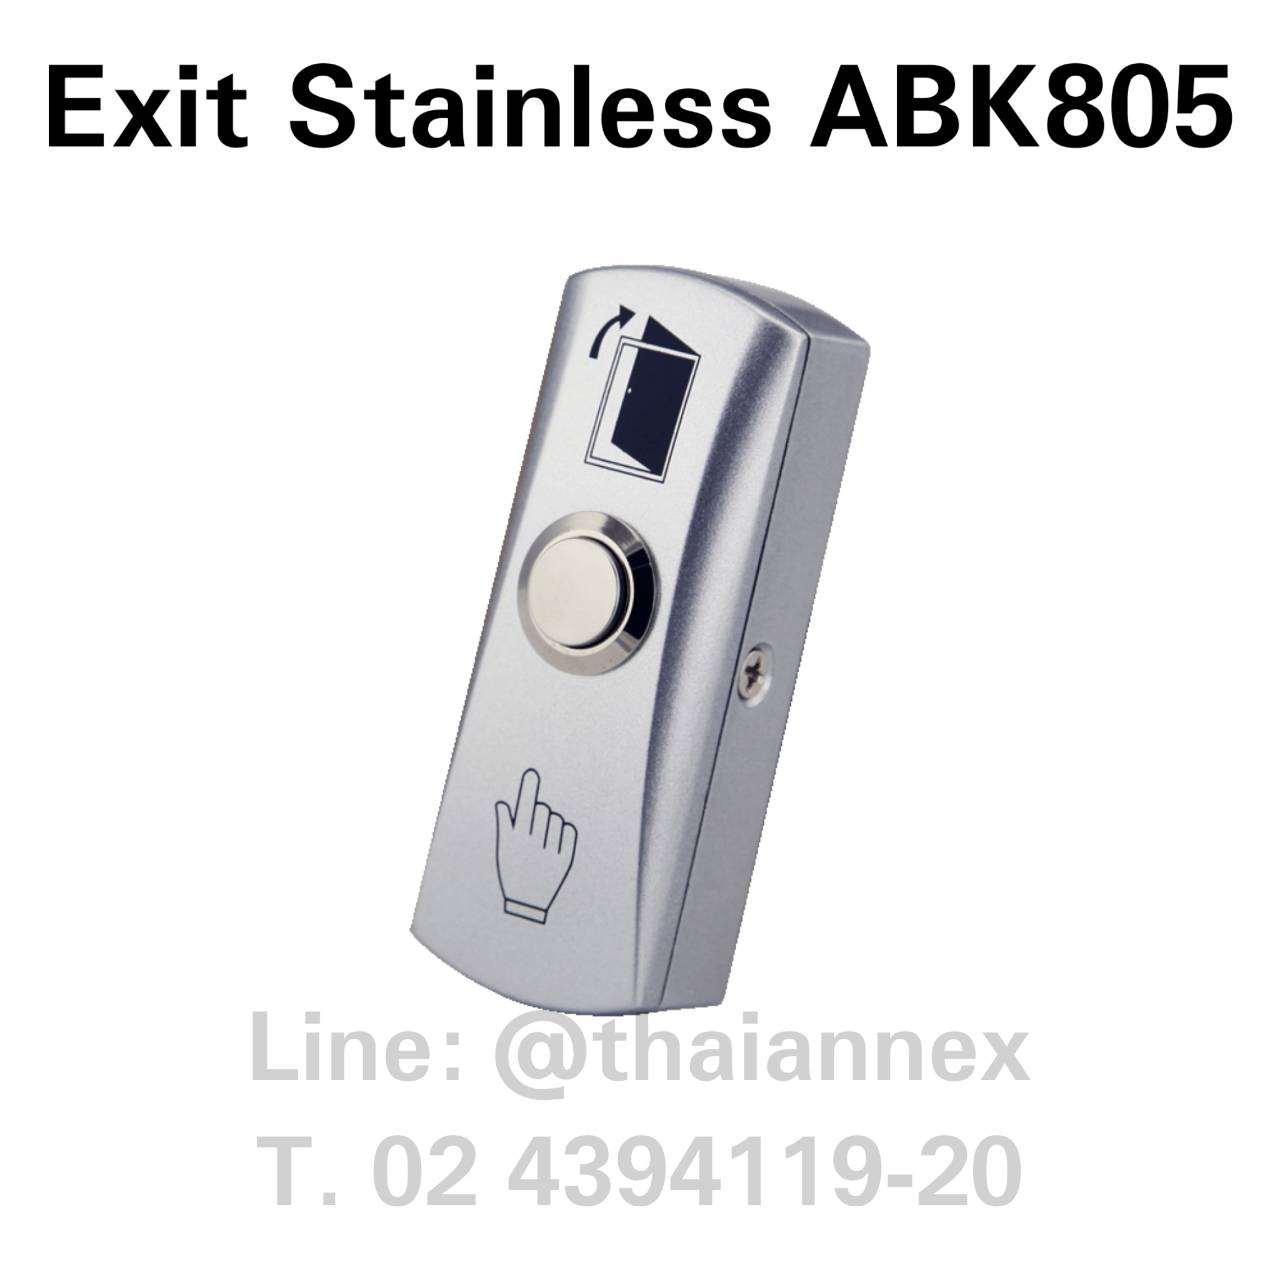 Stainless Exit Switch : ABK805